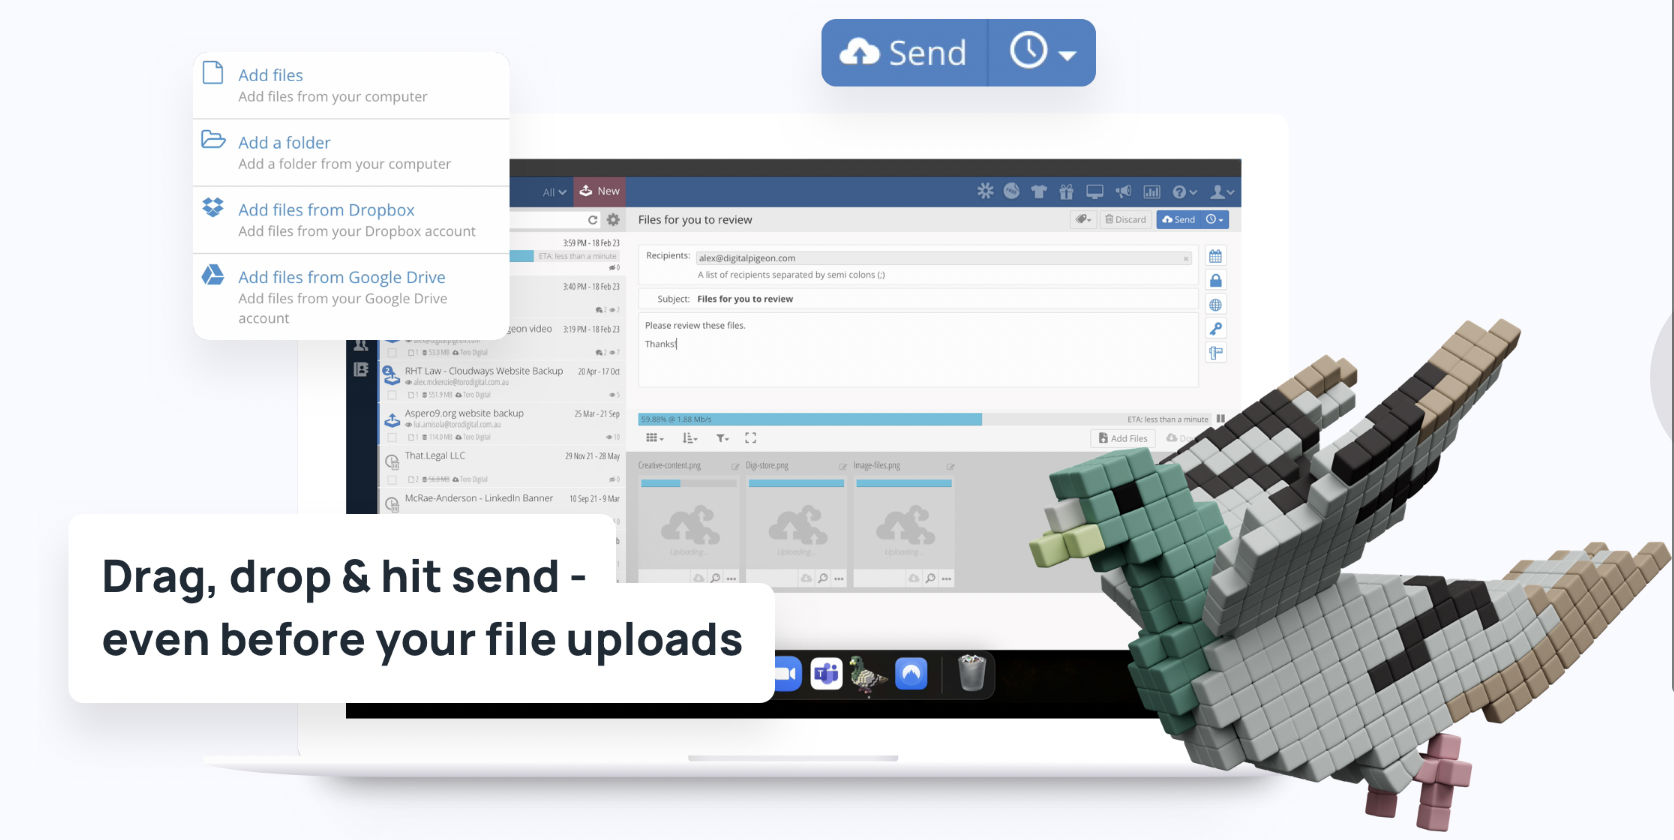 Drag & drop files, then hit send - you don't have to wait around until they're fully uploaded before sending!